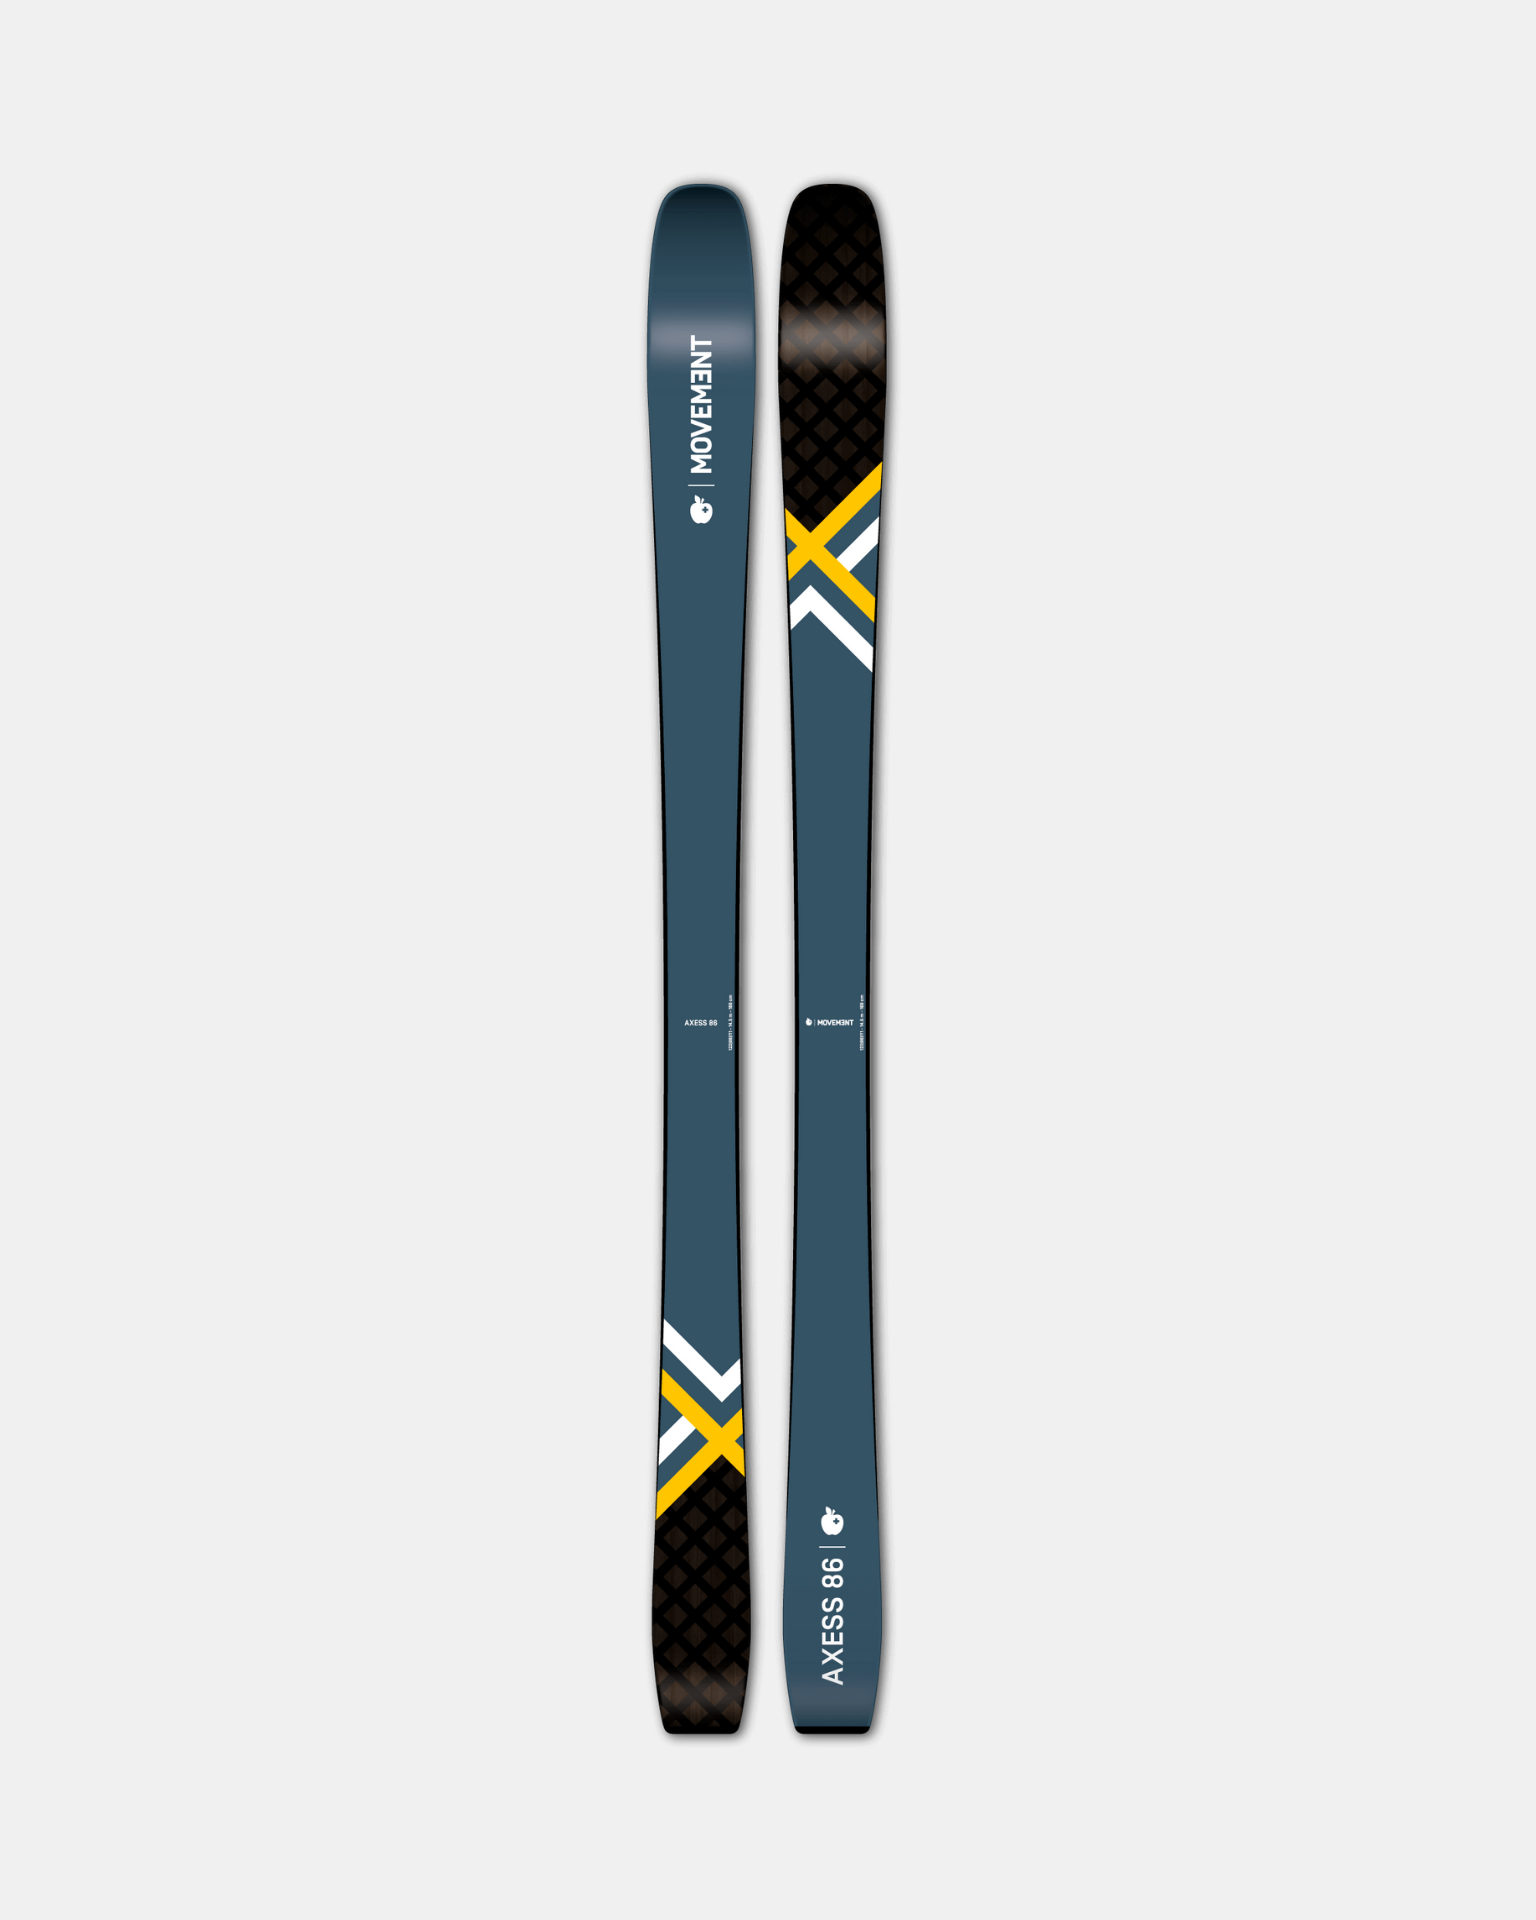 Master diverse terrain with Movement&#39;s Axess 86 all-terrain skis.